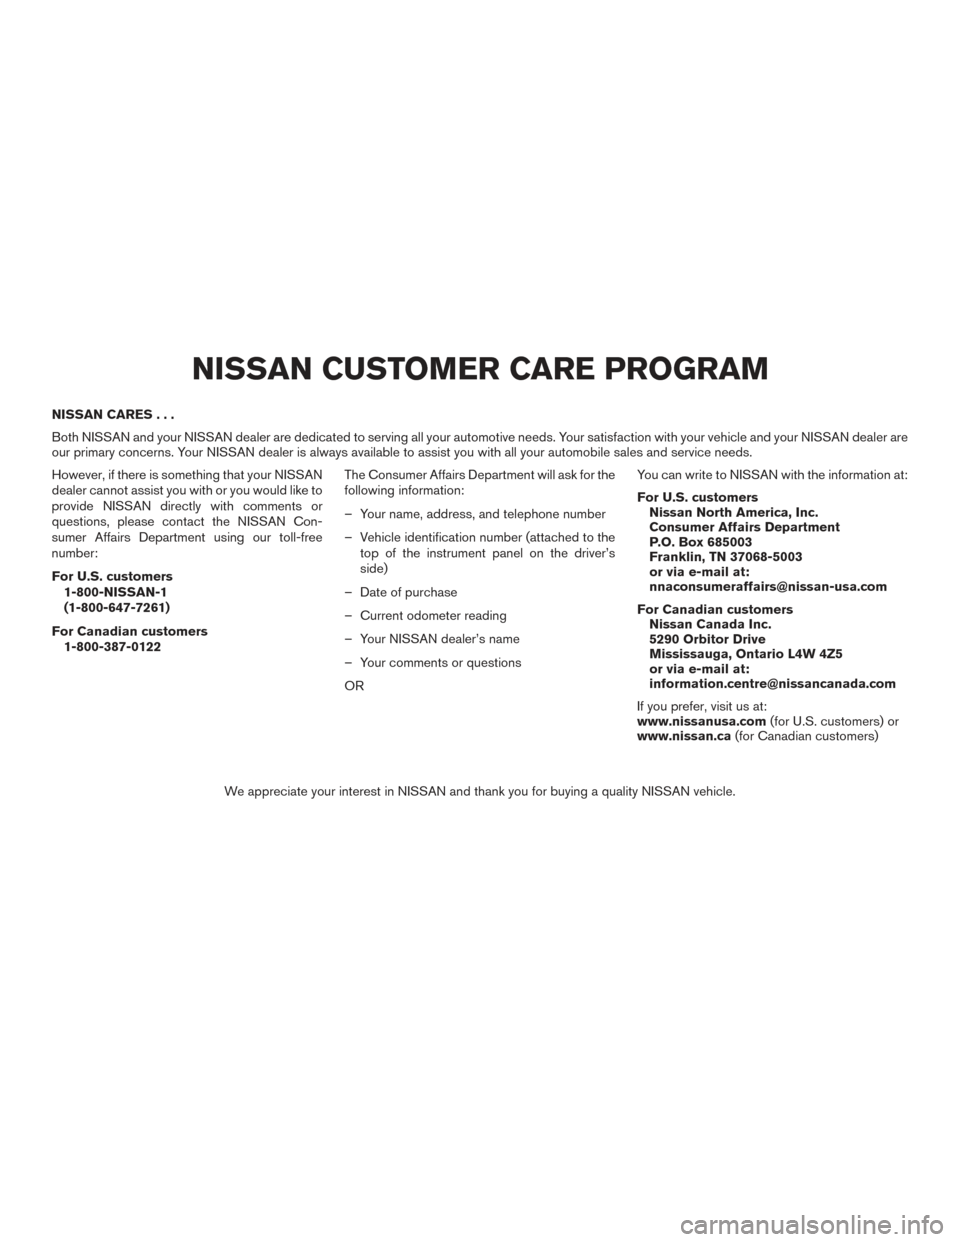 NISSAN ALTIMA 2017 L33 / 5.G Owners Manual NISSAN CARES...
Both NISSAN and your NISSAN dealer are dedicated to serving all your automotive needs. Your satisfaction with your vehicle and your NISSAN dealer are
our primary concerns. Your NISSAN 